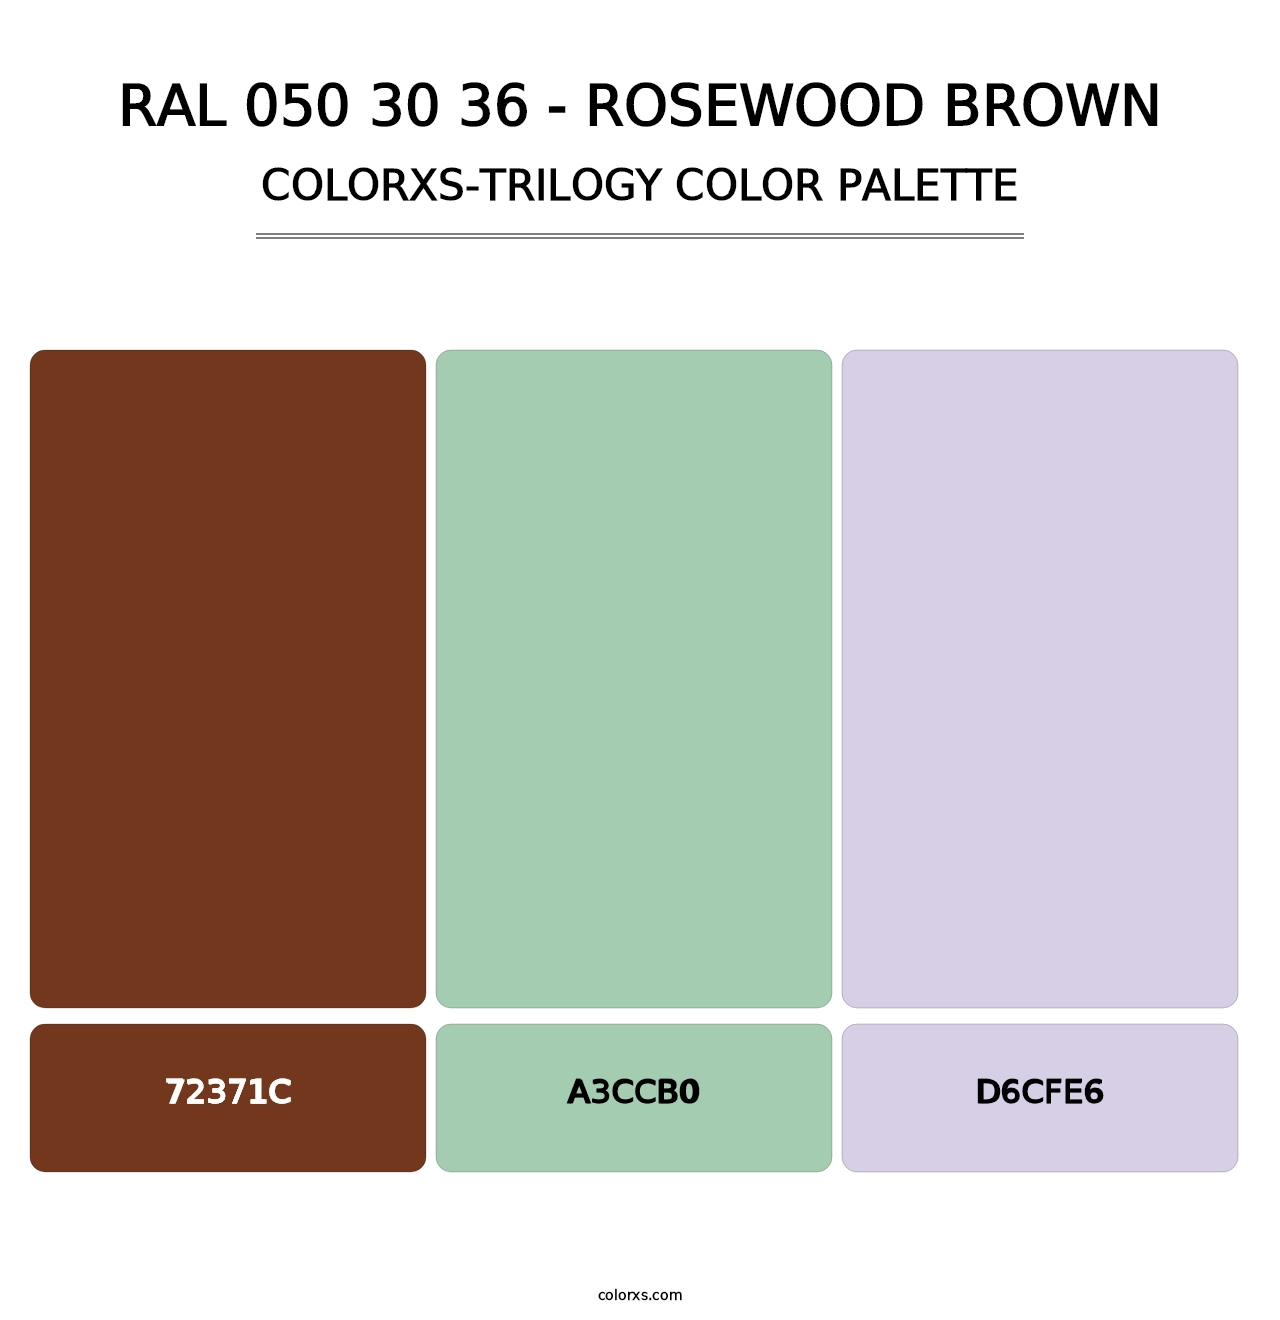 RAL 050 30 36 - Rosewood Brown - Colorxs Trilogy Palette